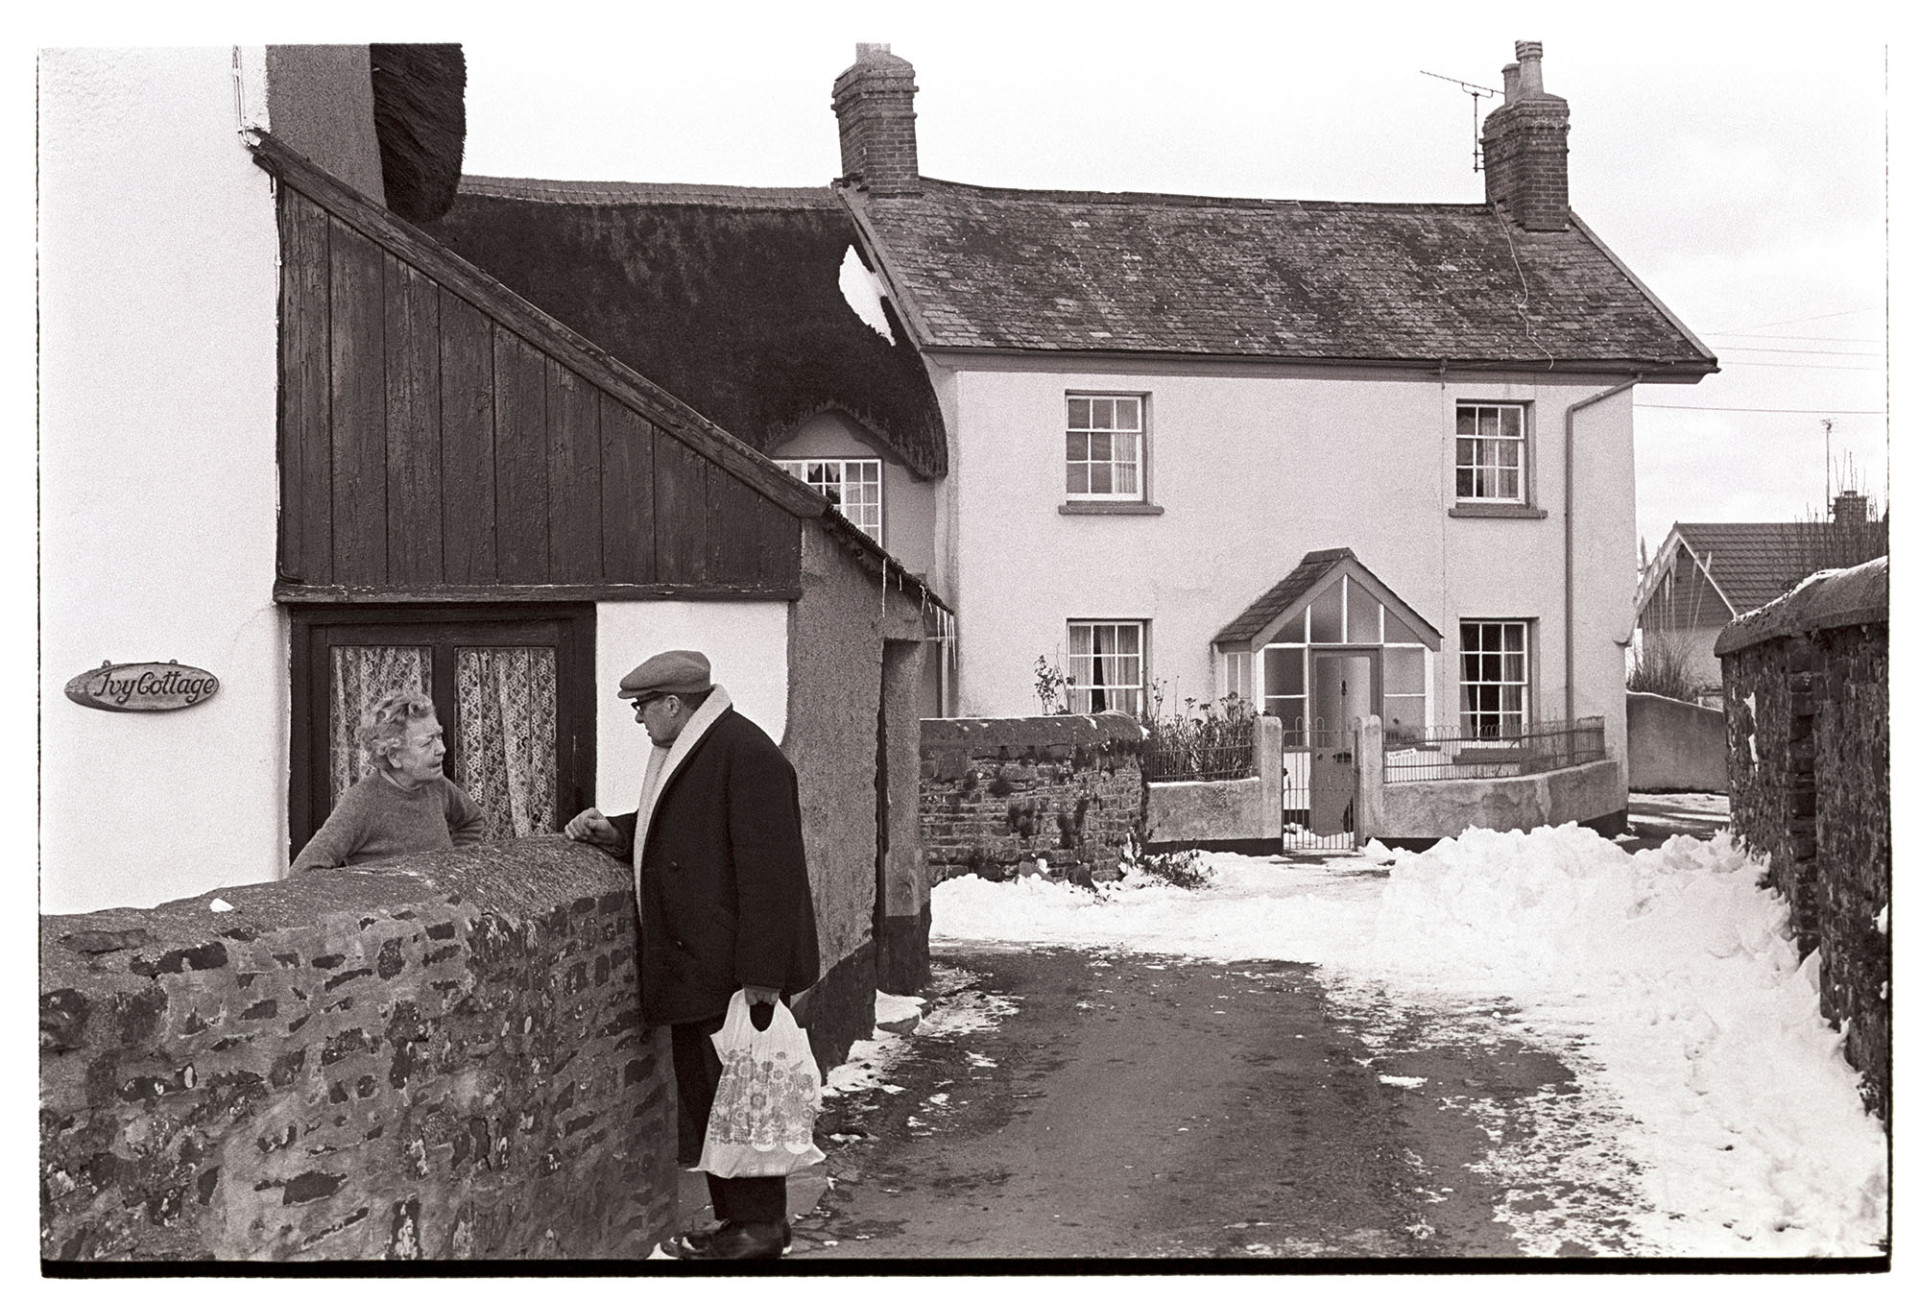 Snow, couple chatting over wall, house with unusual roof. 
[A man and woman talking over a wall at Joy Cottage in Dolton. In the background a snow covered street and cottage with a slate roof is visible. The roof has an overhang at one end.]